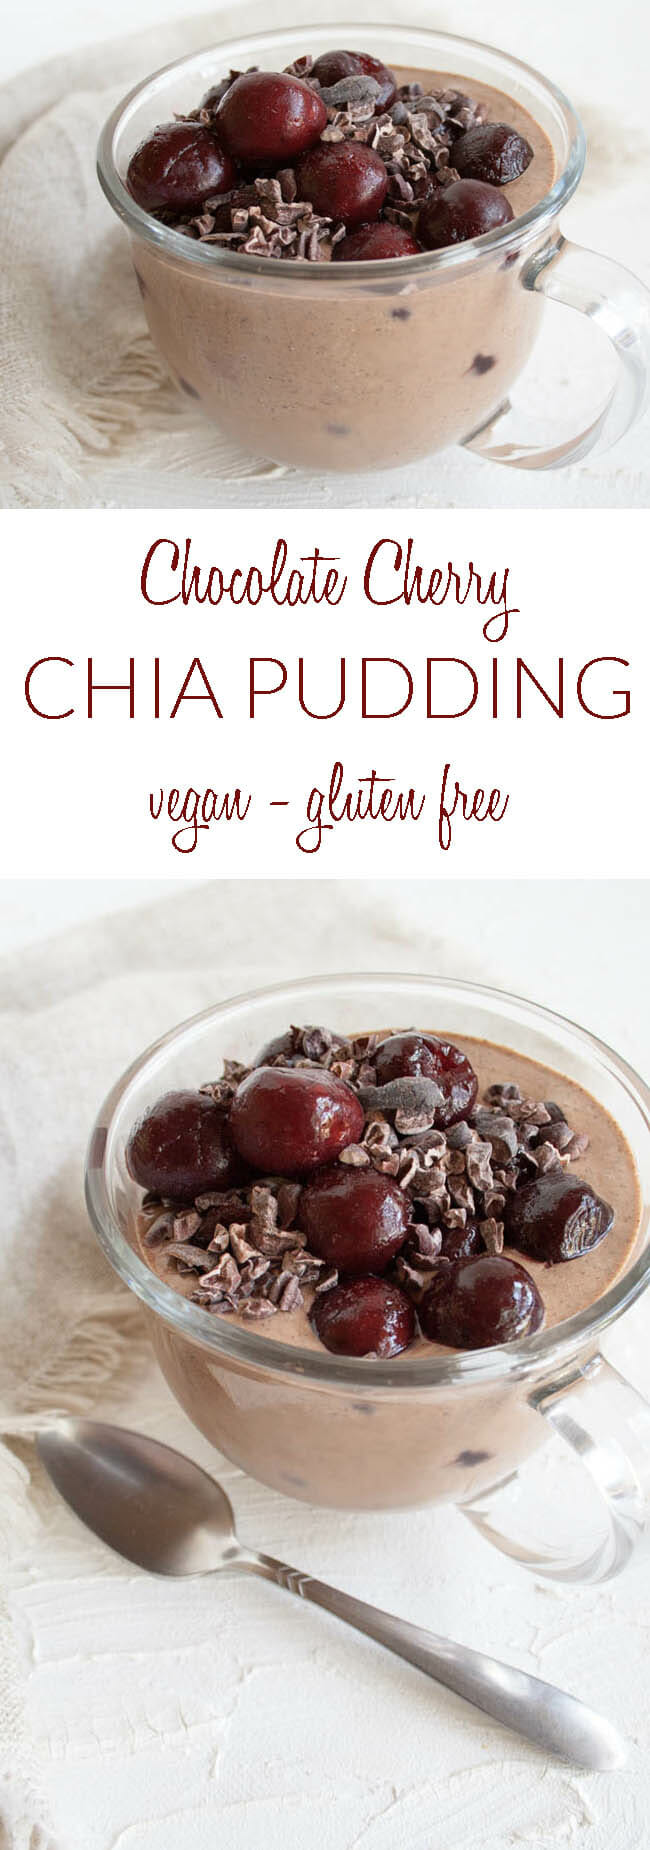 Chocolate Cherry Chia Pudding collage photo with text.